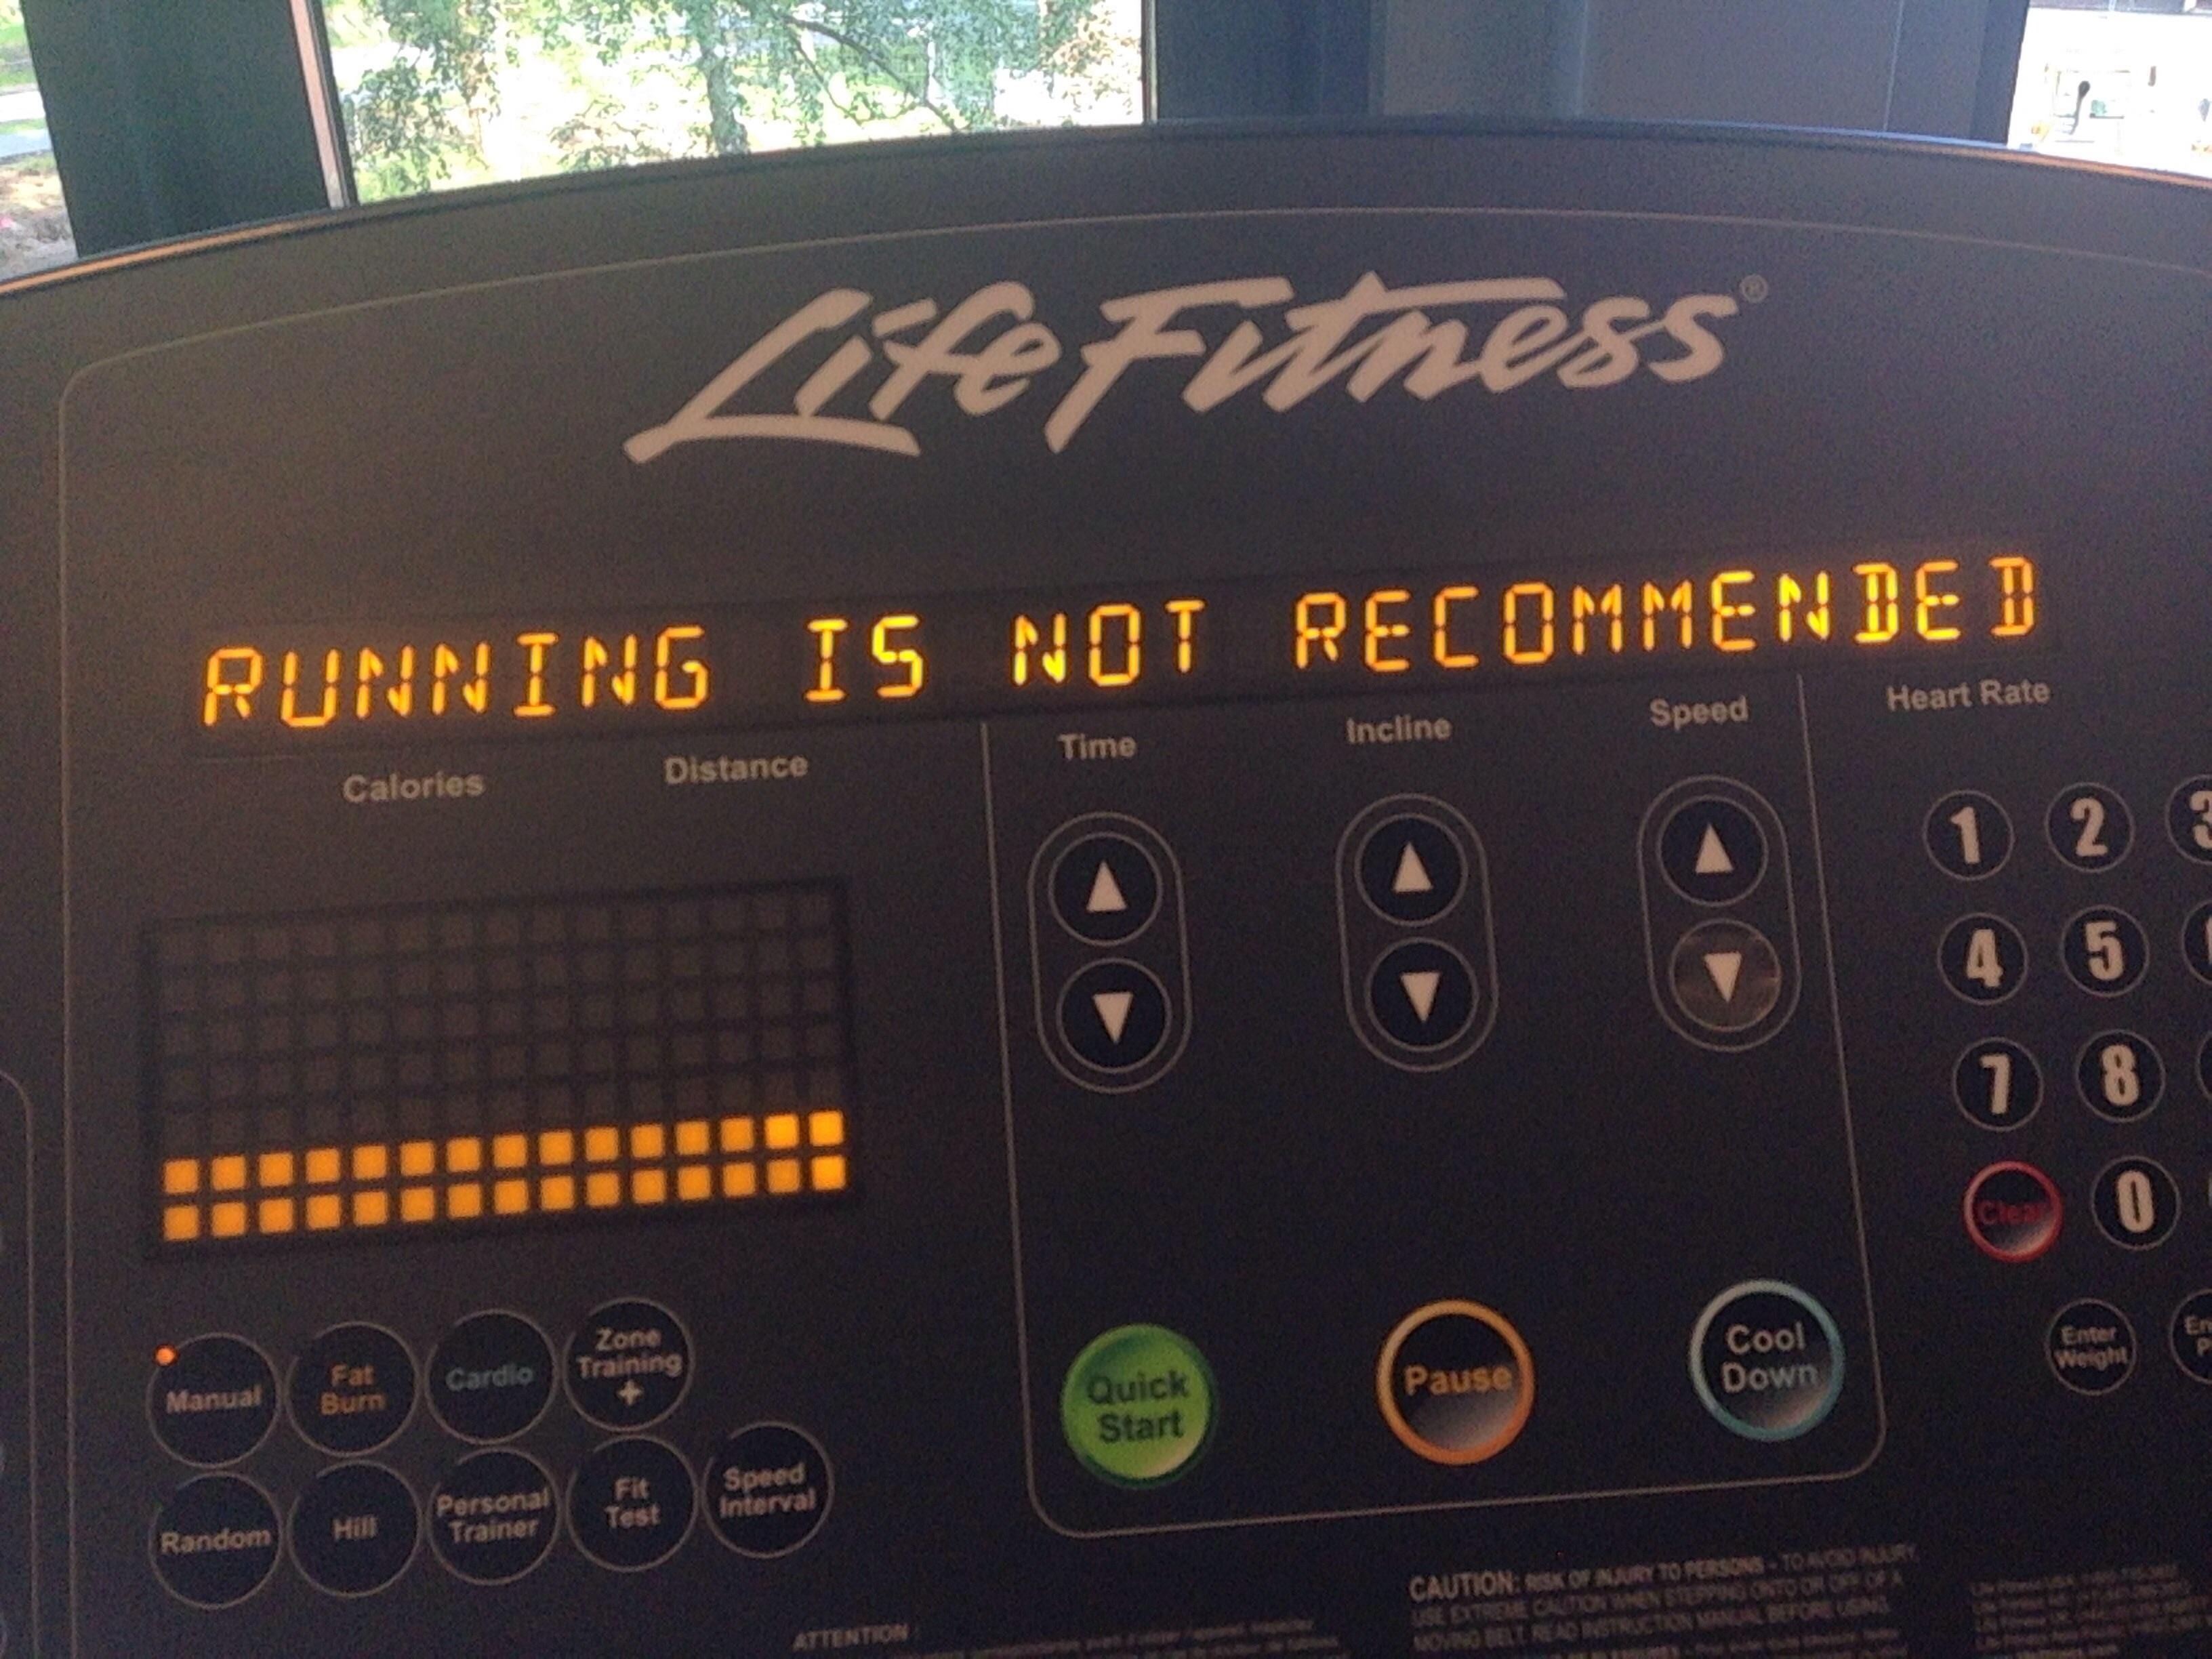 This treadmill was giving me some good advice while working out today